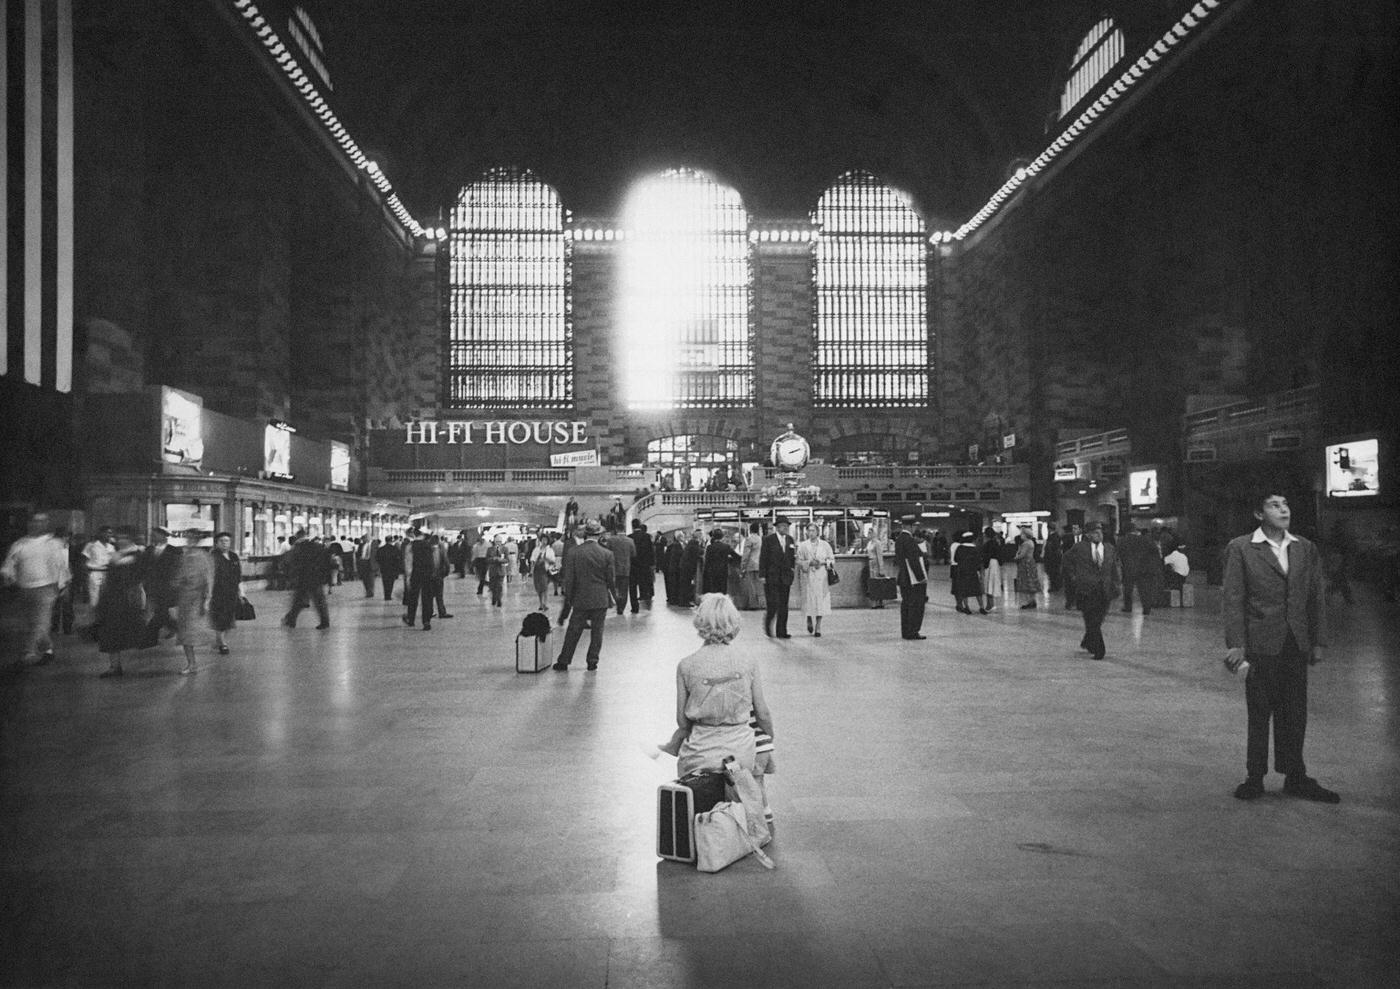 Woman Sitting On Luggage, Main Concourse, Grand Central Terminal, Manhattan, 1958